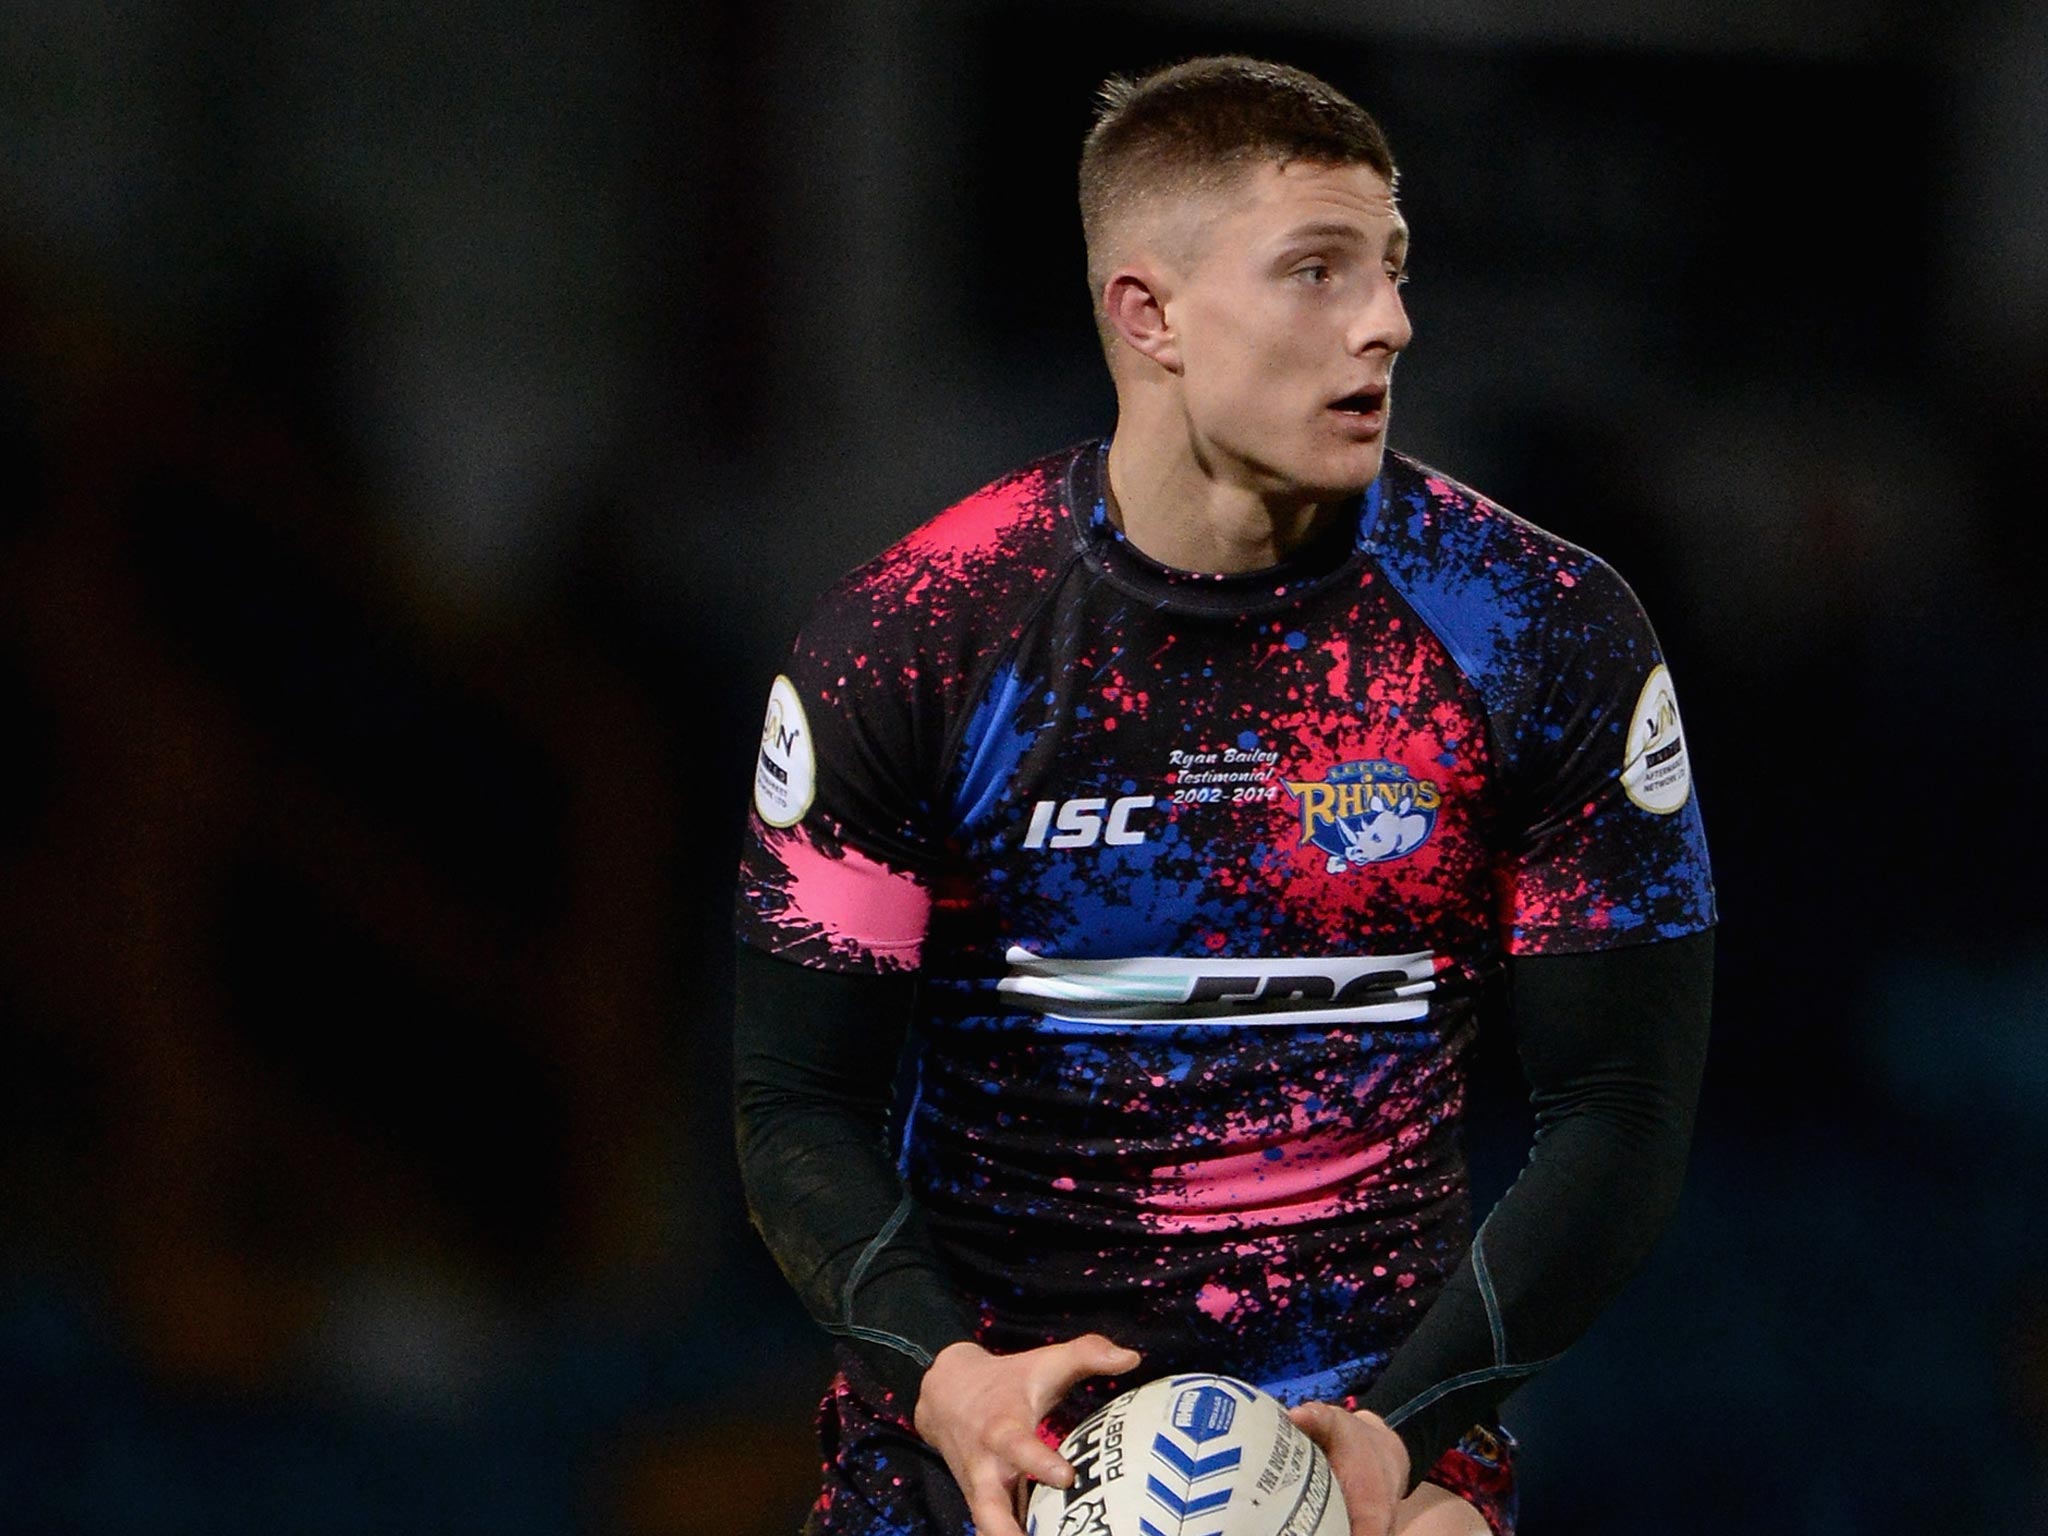 Leeds Rhinos teenage stand-off Liam Sutcliffe has joined rivals Bradford Bulls on an initial one-month loan